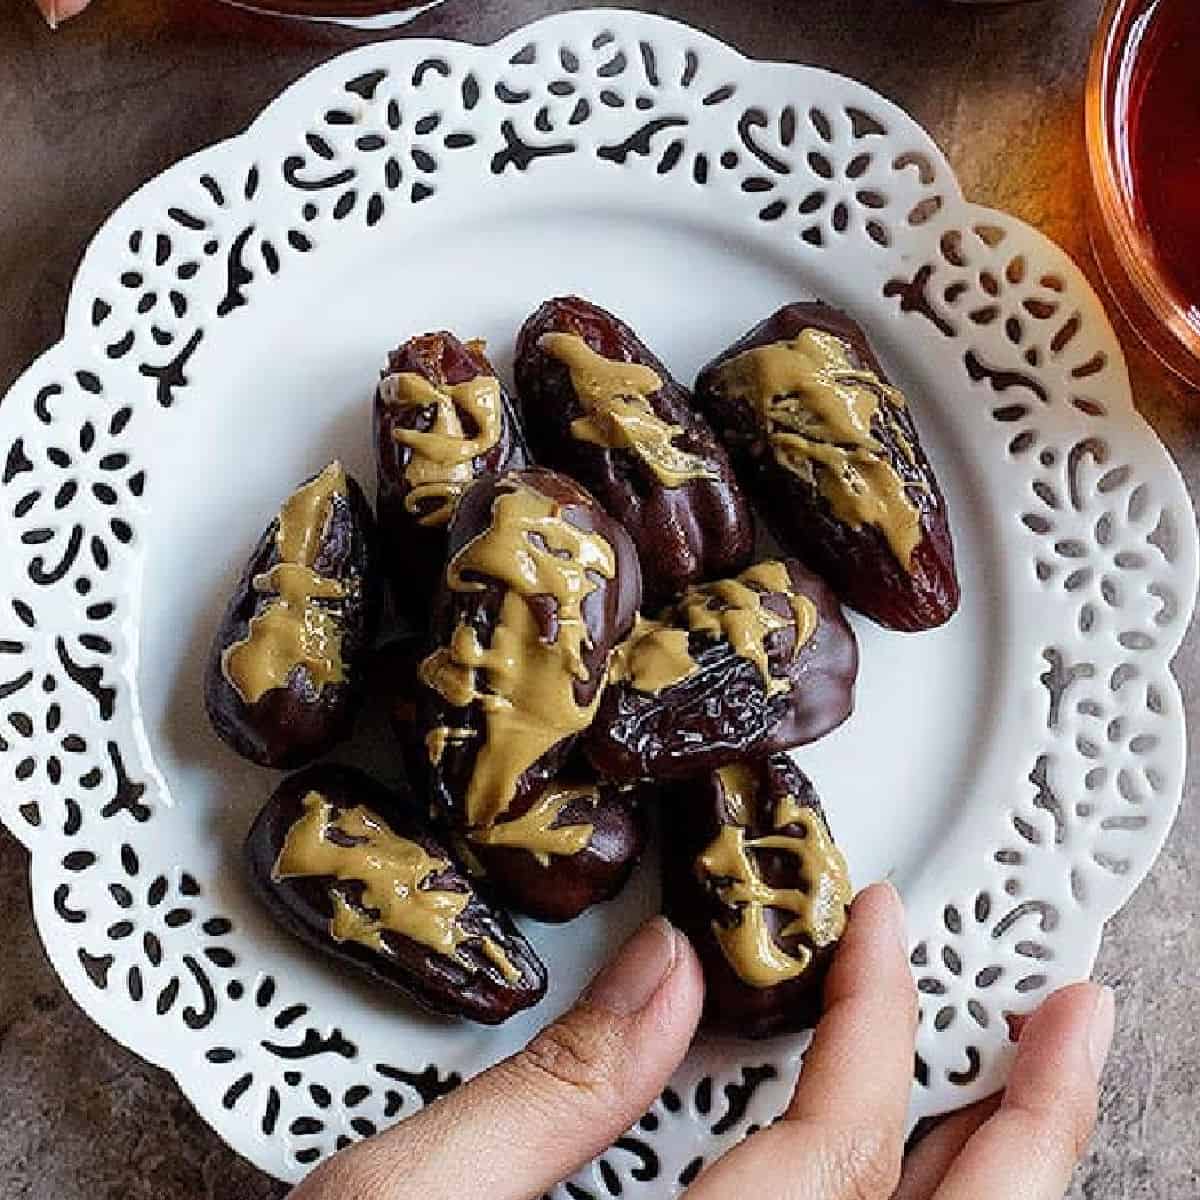 Stuffed dates are ready in 15 minutes and make the best snack. This is a healthy snack recipe that everyone loves, it's naturally sweetened, gluten-free and dairy-free.
